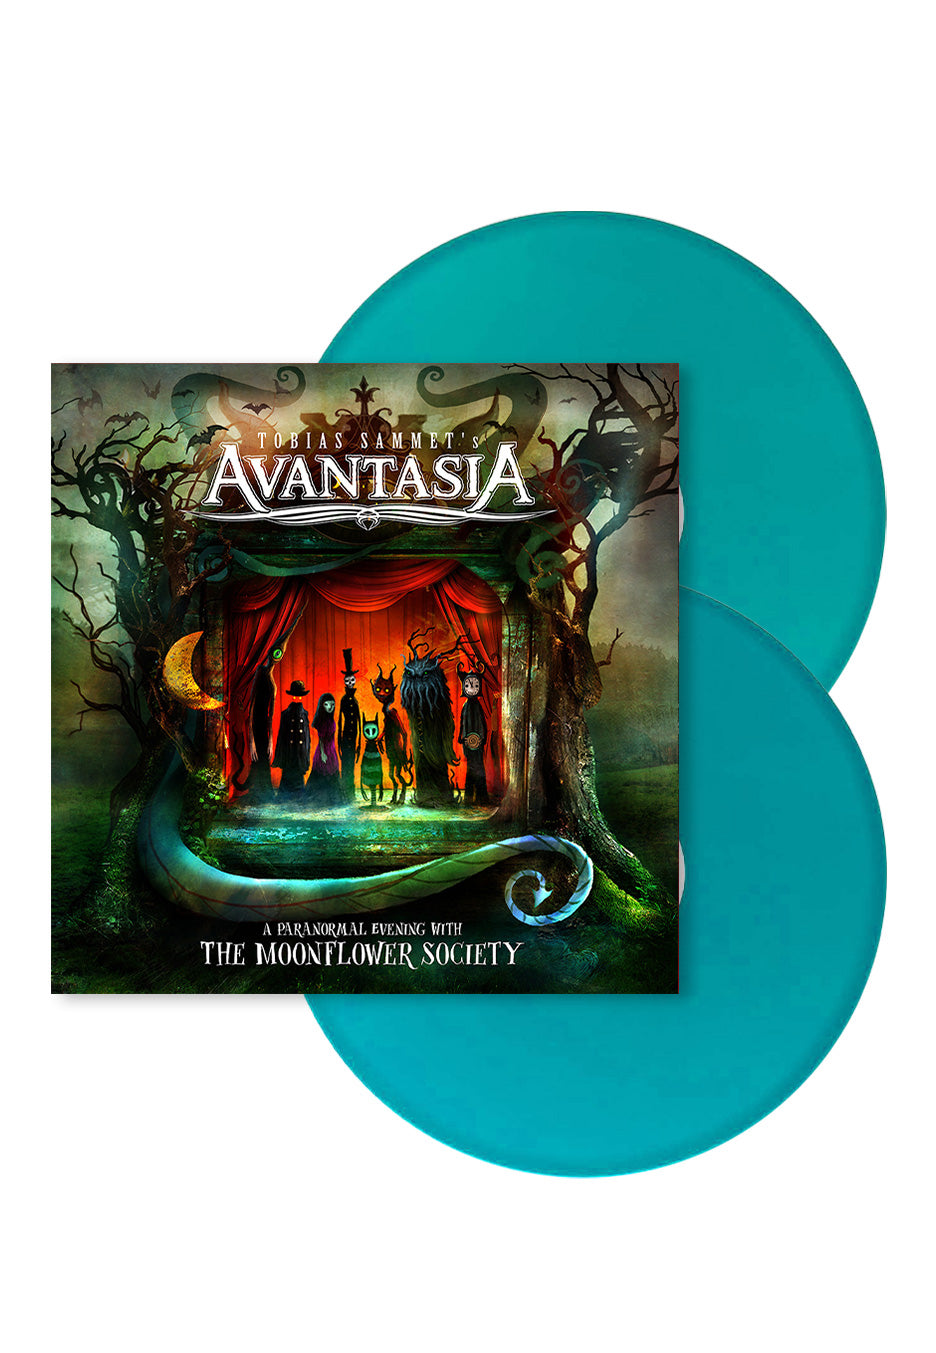 Avantasia - A Paranormal Evening with the Moonflower Society Marine Blue Ltd. - Colored 2 Vinyl